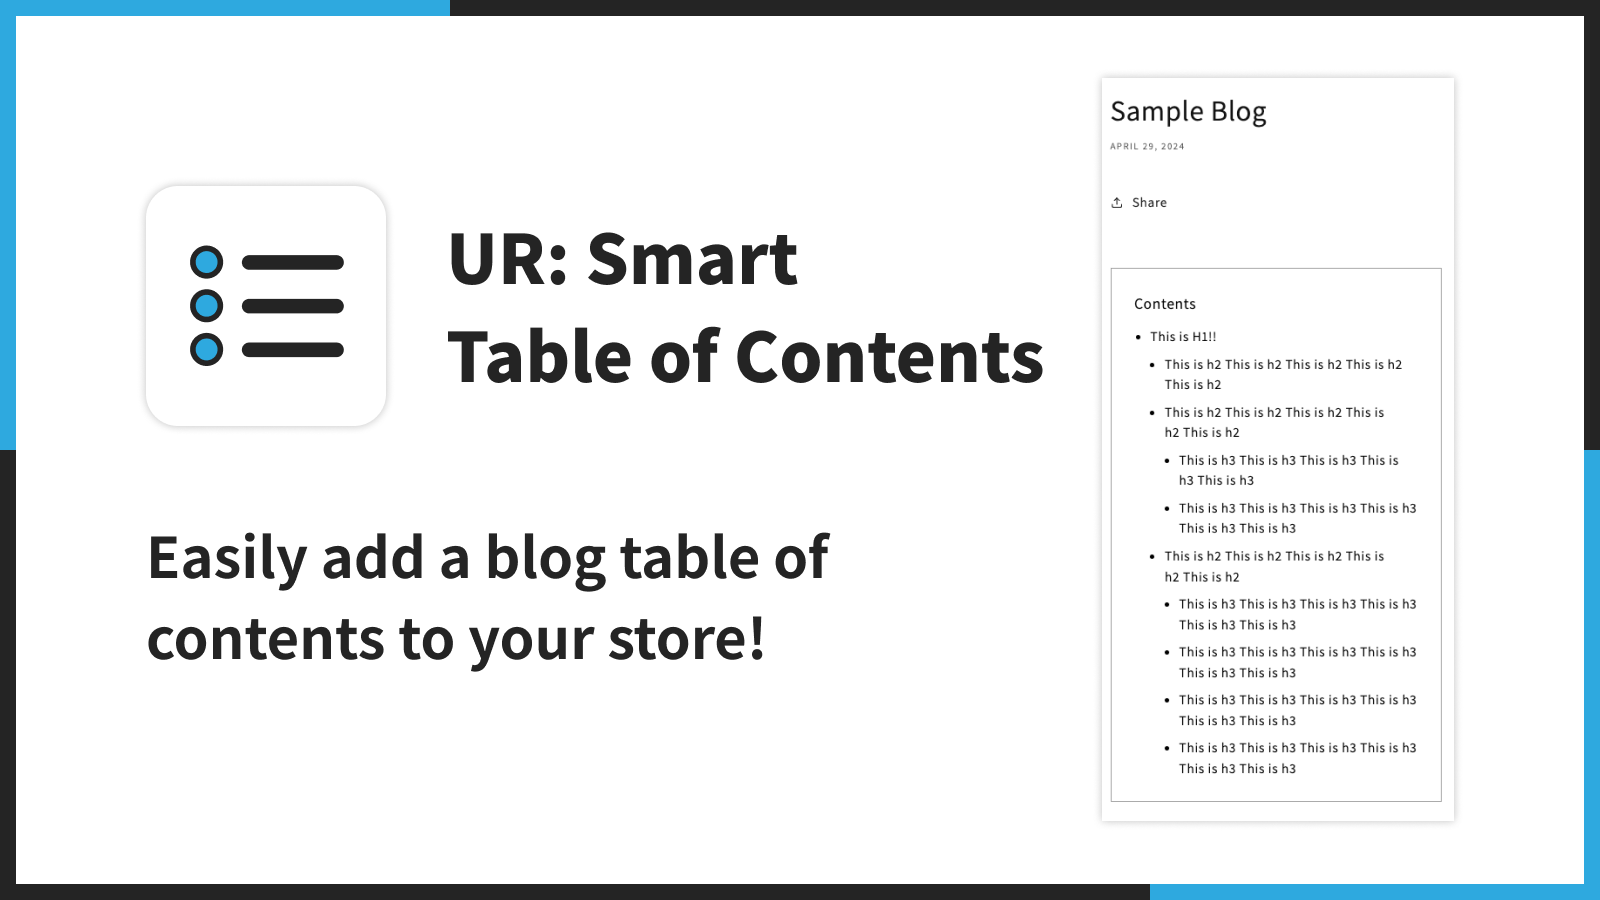 UR: Smart Table of Contents